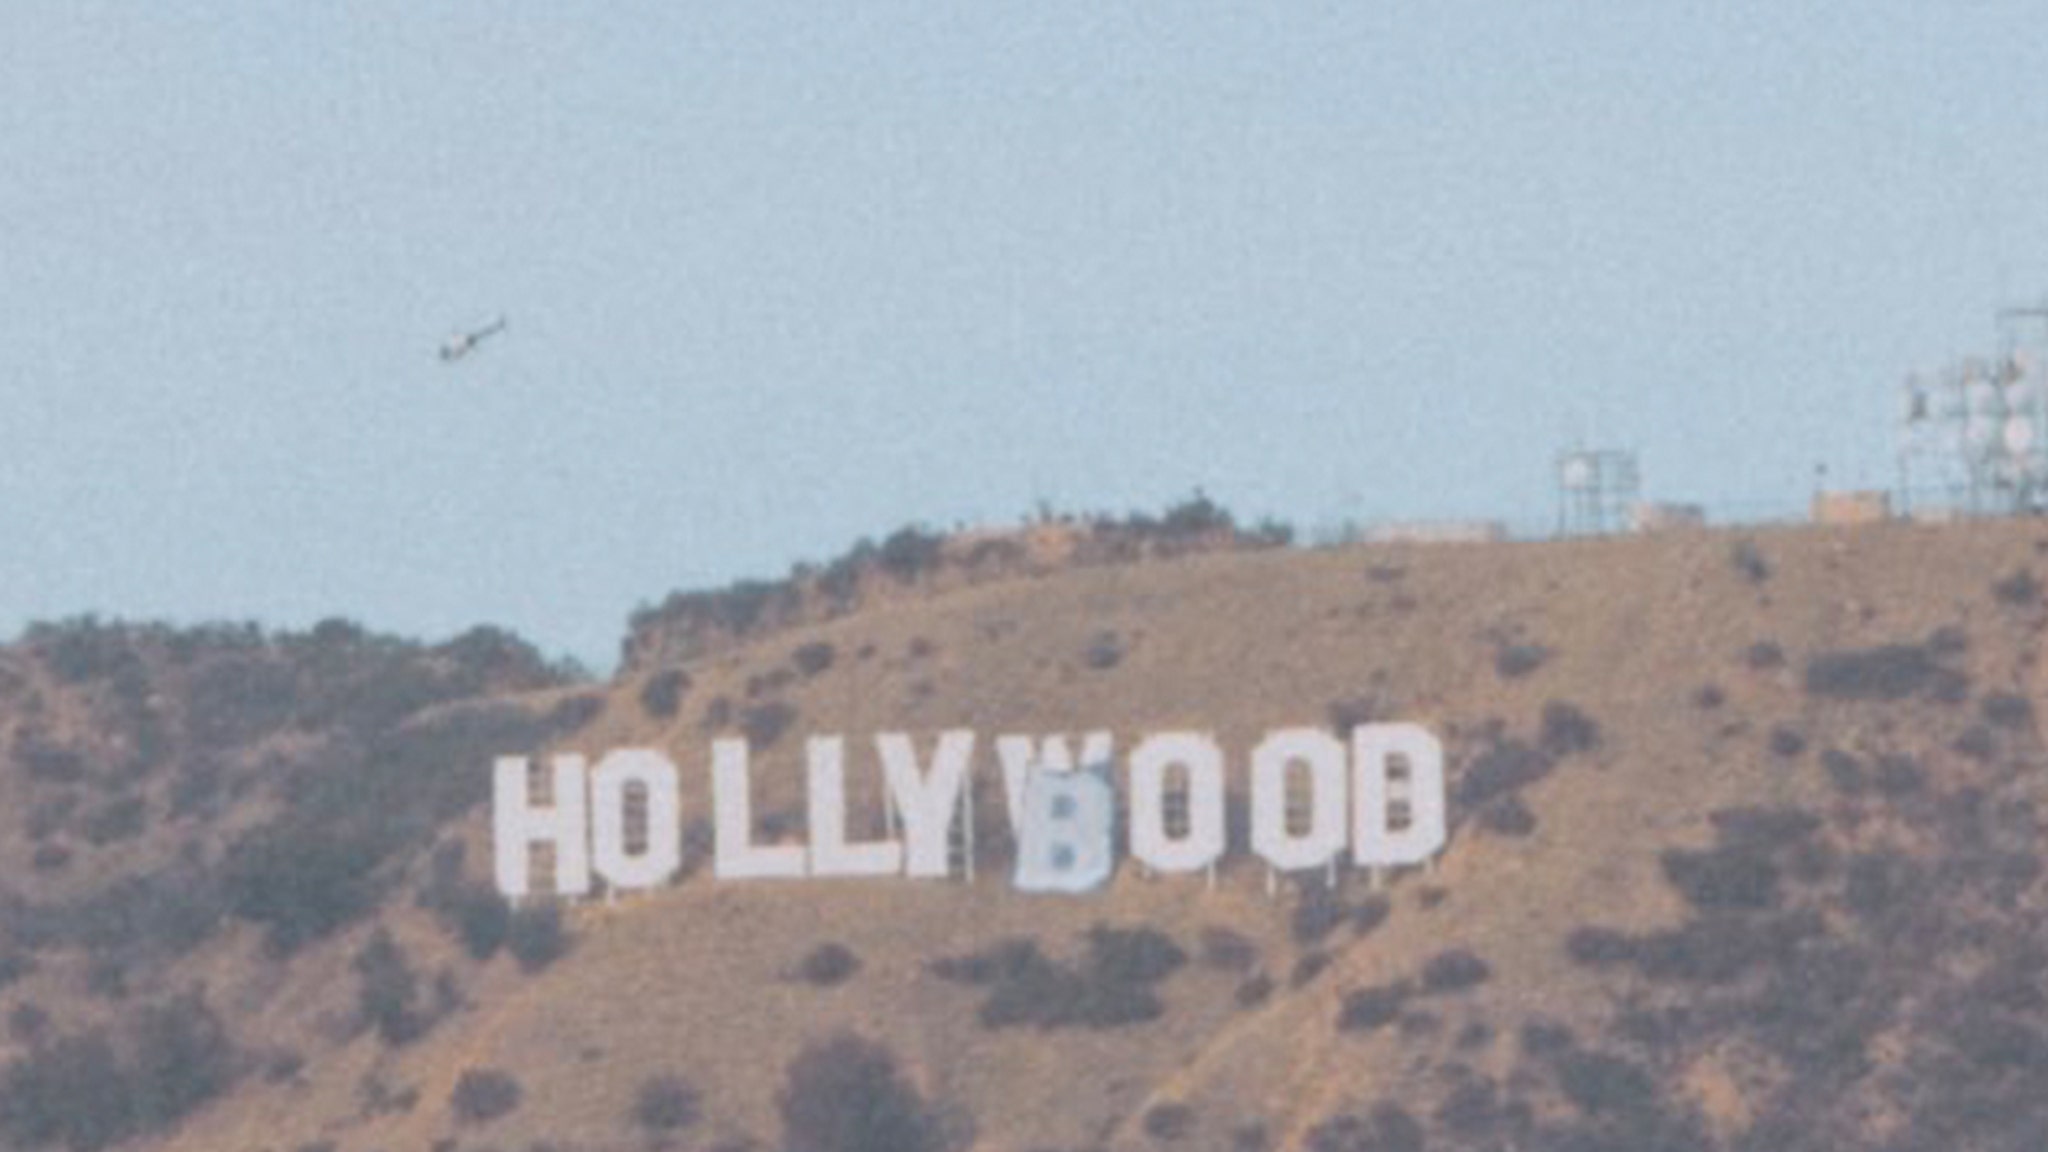 Hollywood sign changed to ‘Hollyboob’ because of illegal breast cancer awareness